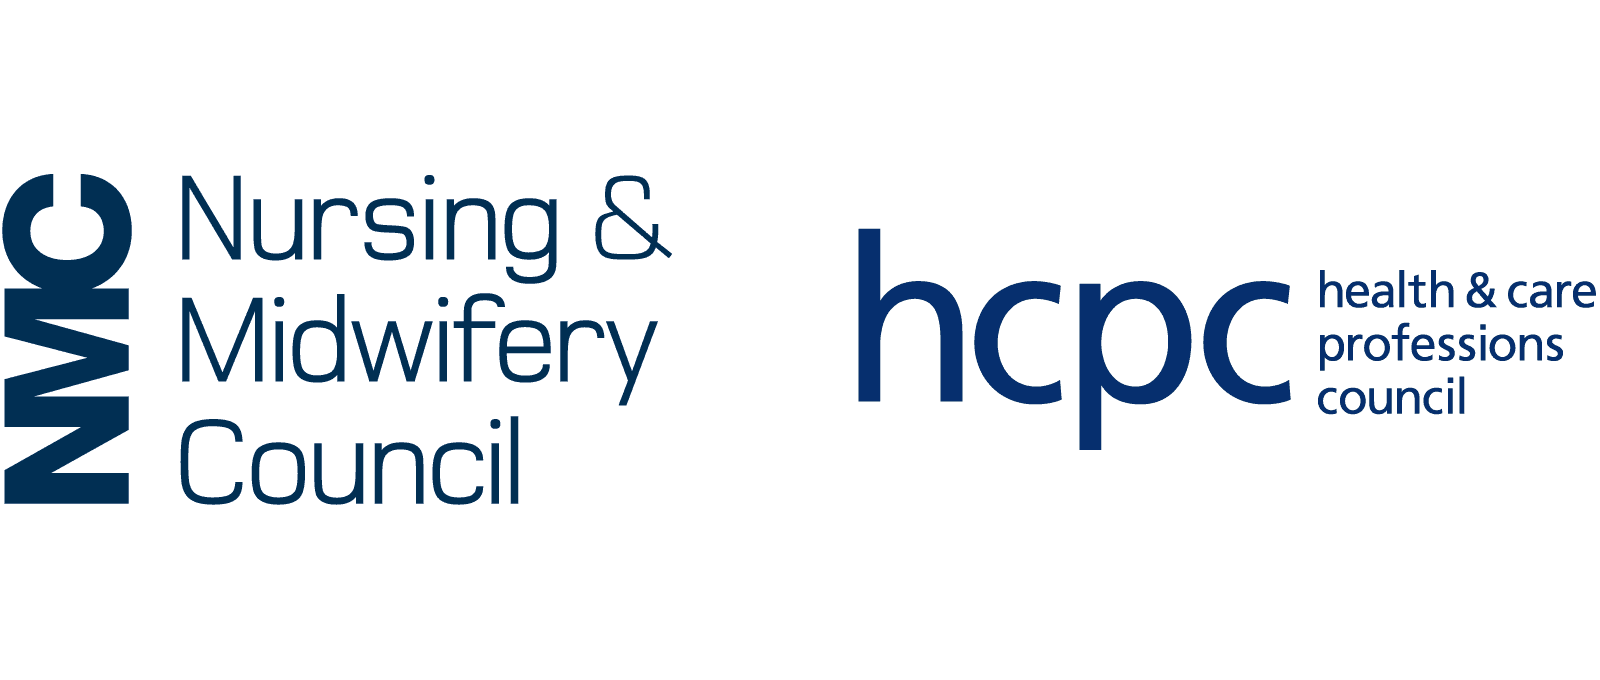 Nursing and Midwifery Council, the Health and Care Professions Council